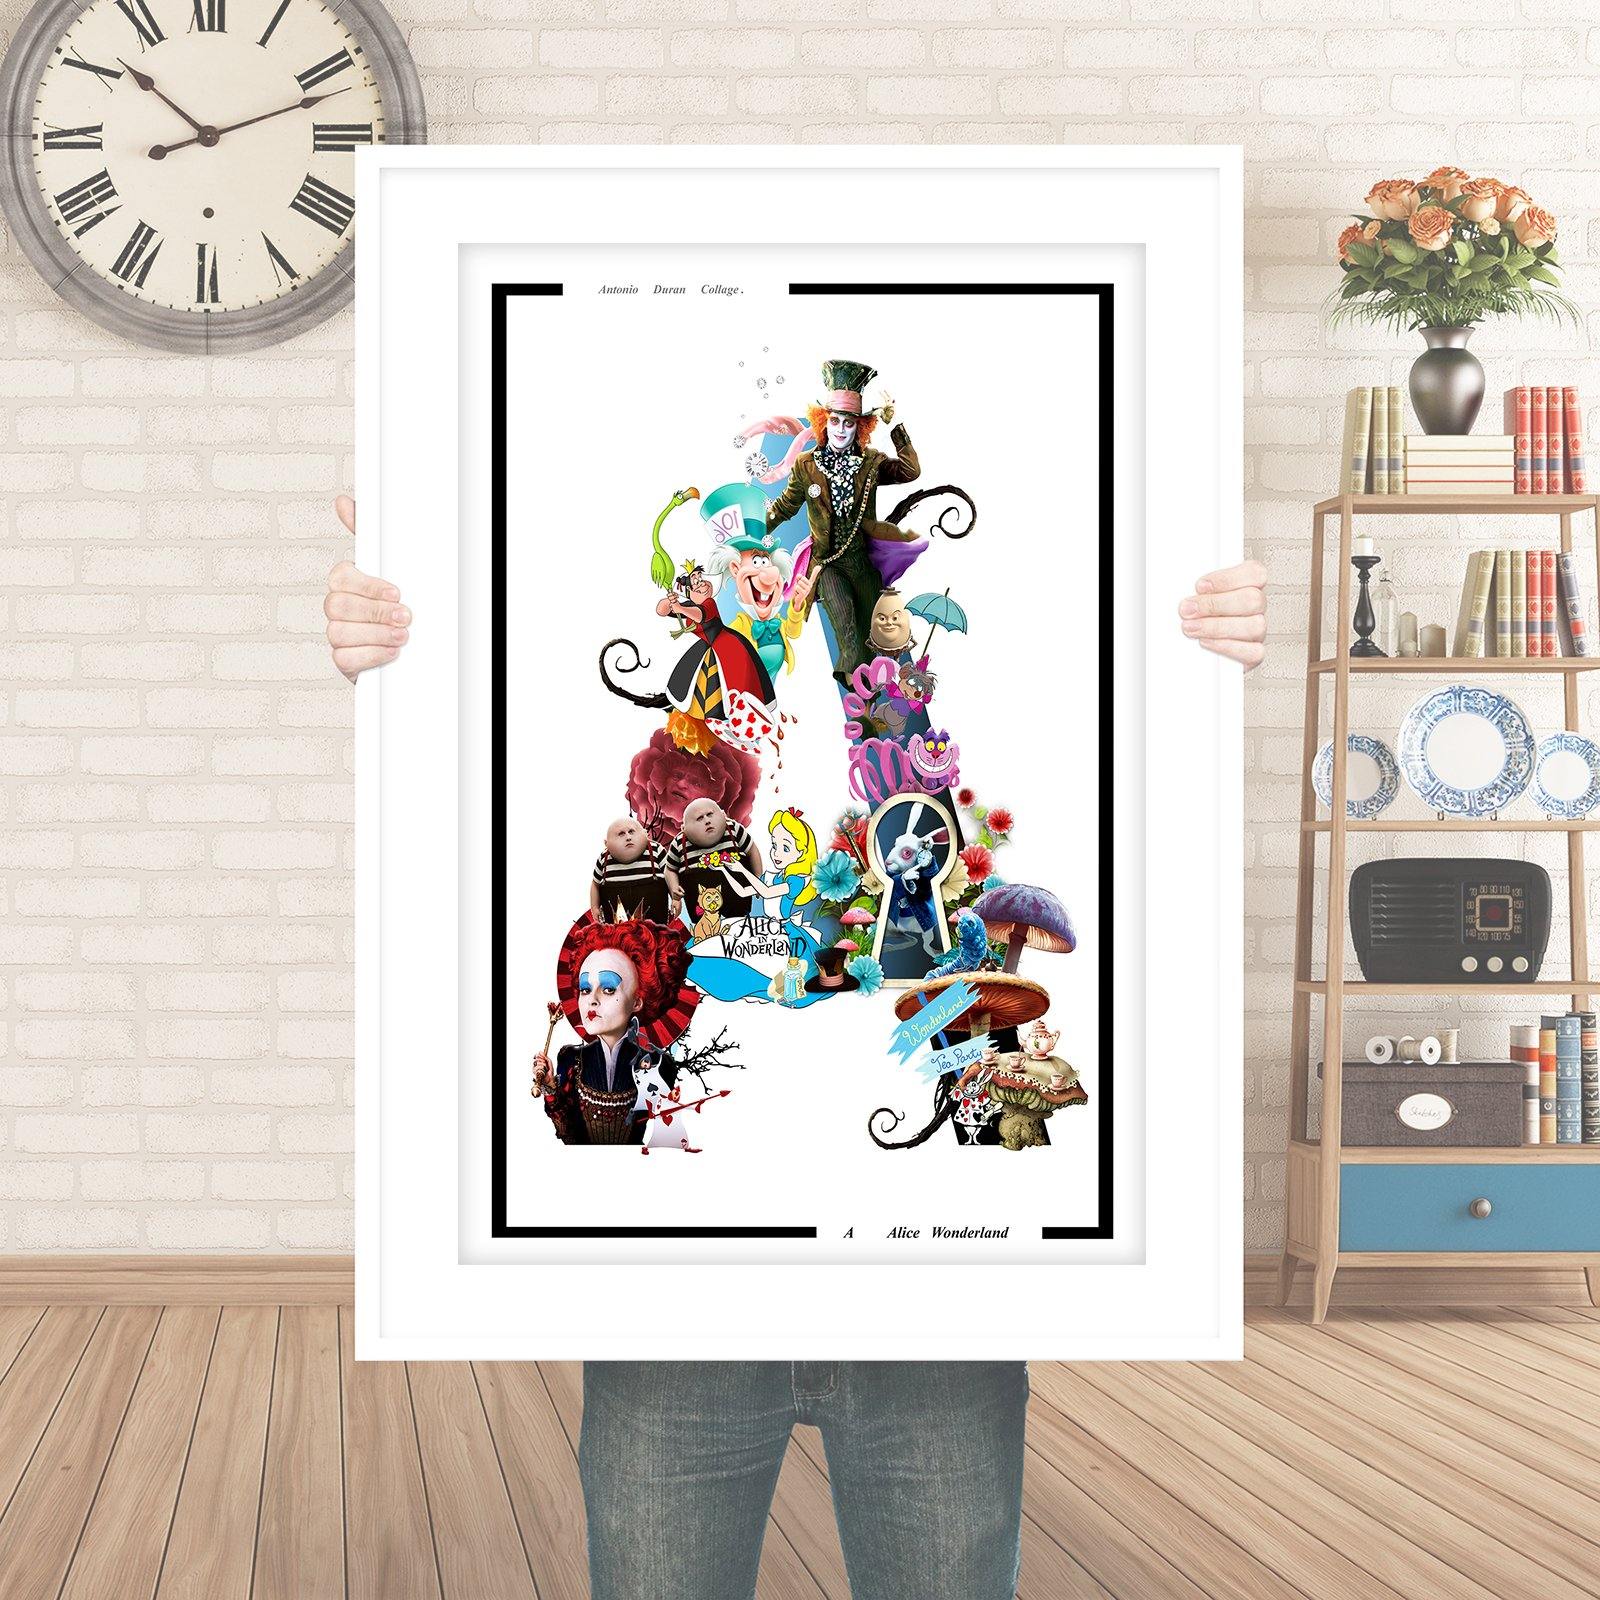 Who says you can't have your Alice in Wonderland movie poster decor dreams come true? Our range of posters and prints make sure you can have the decor of your dreams, no matter how mad they may seem! Get your rabbit hole-bound posters here and have a Wonderland of fun!